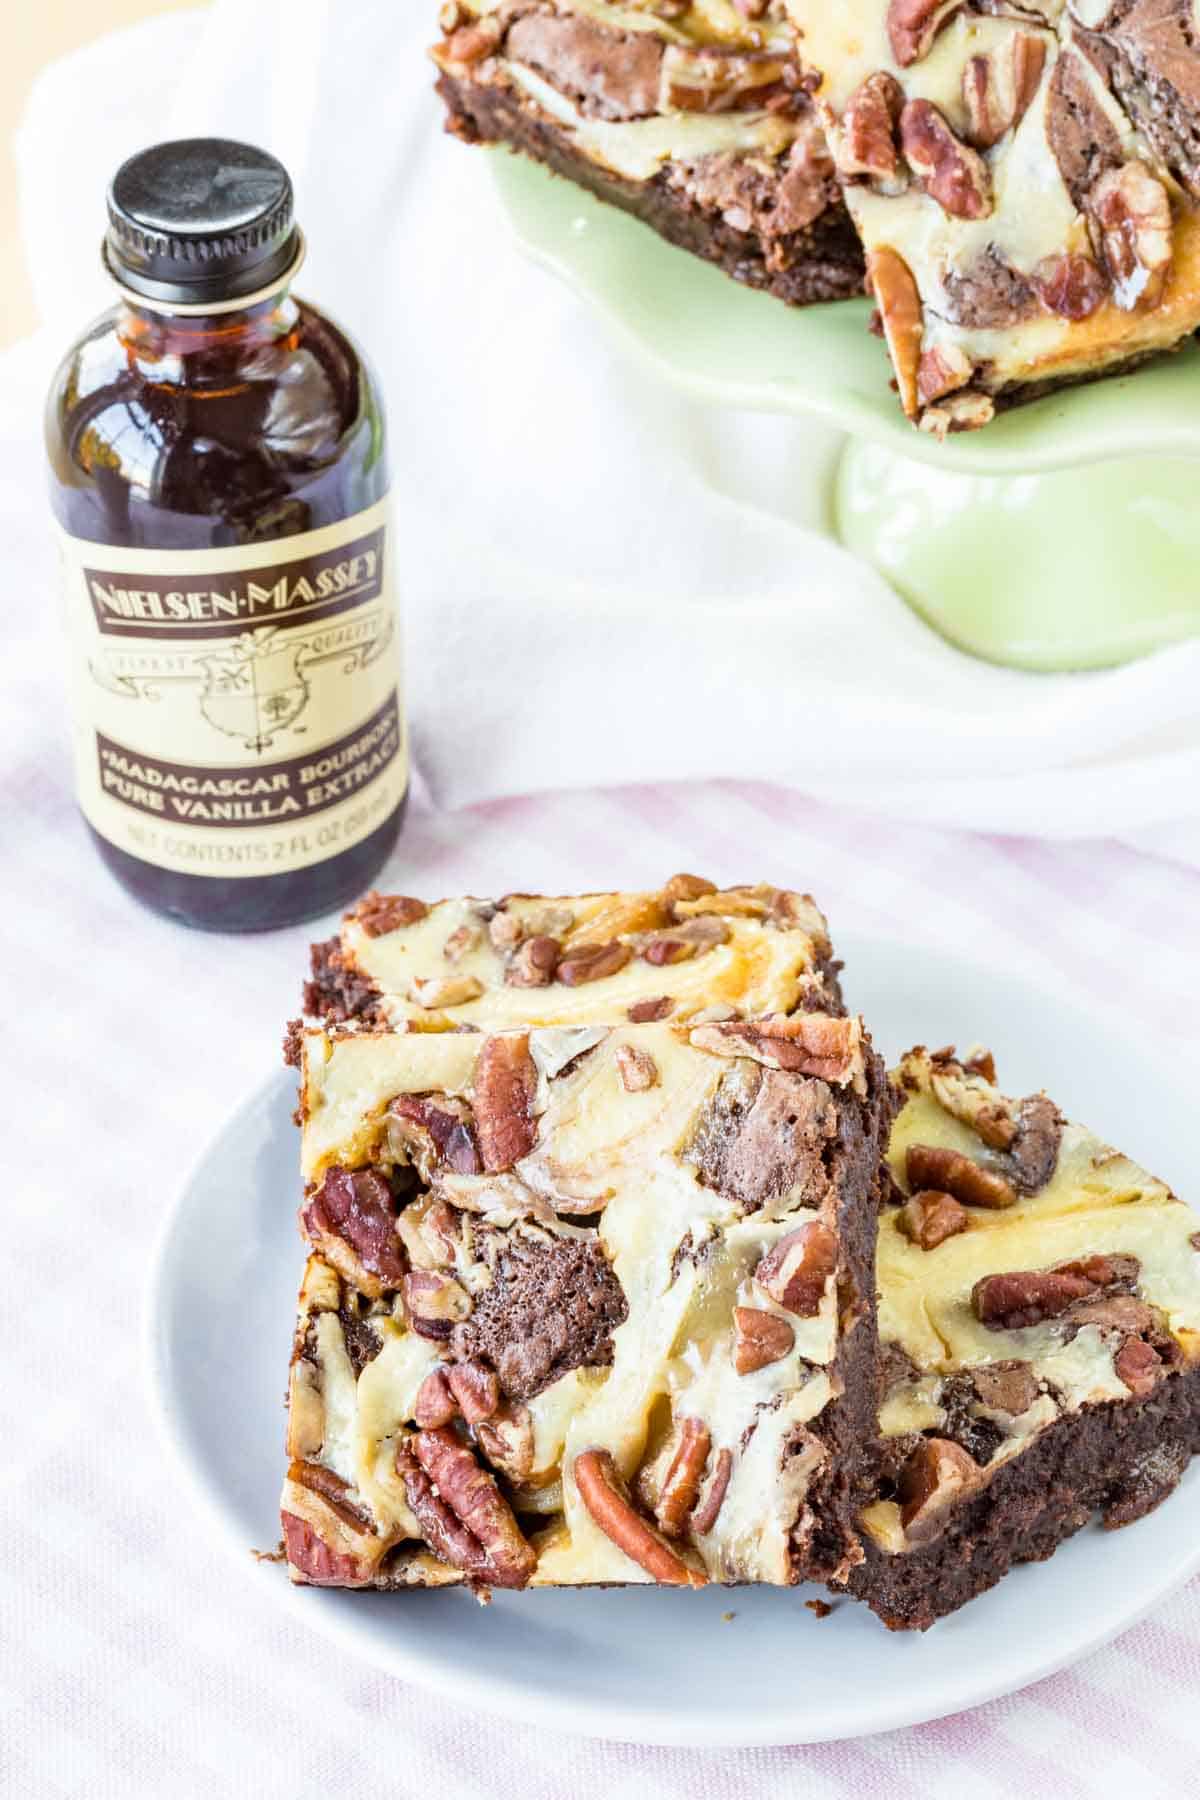 Three caramel pecan brownies on a small plate with a bottle of Nielsen-Massey vanilla extract next to them.